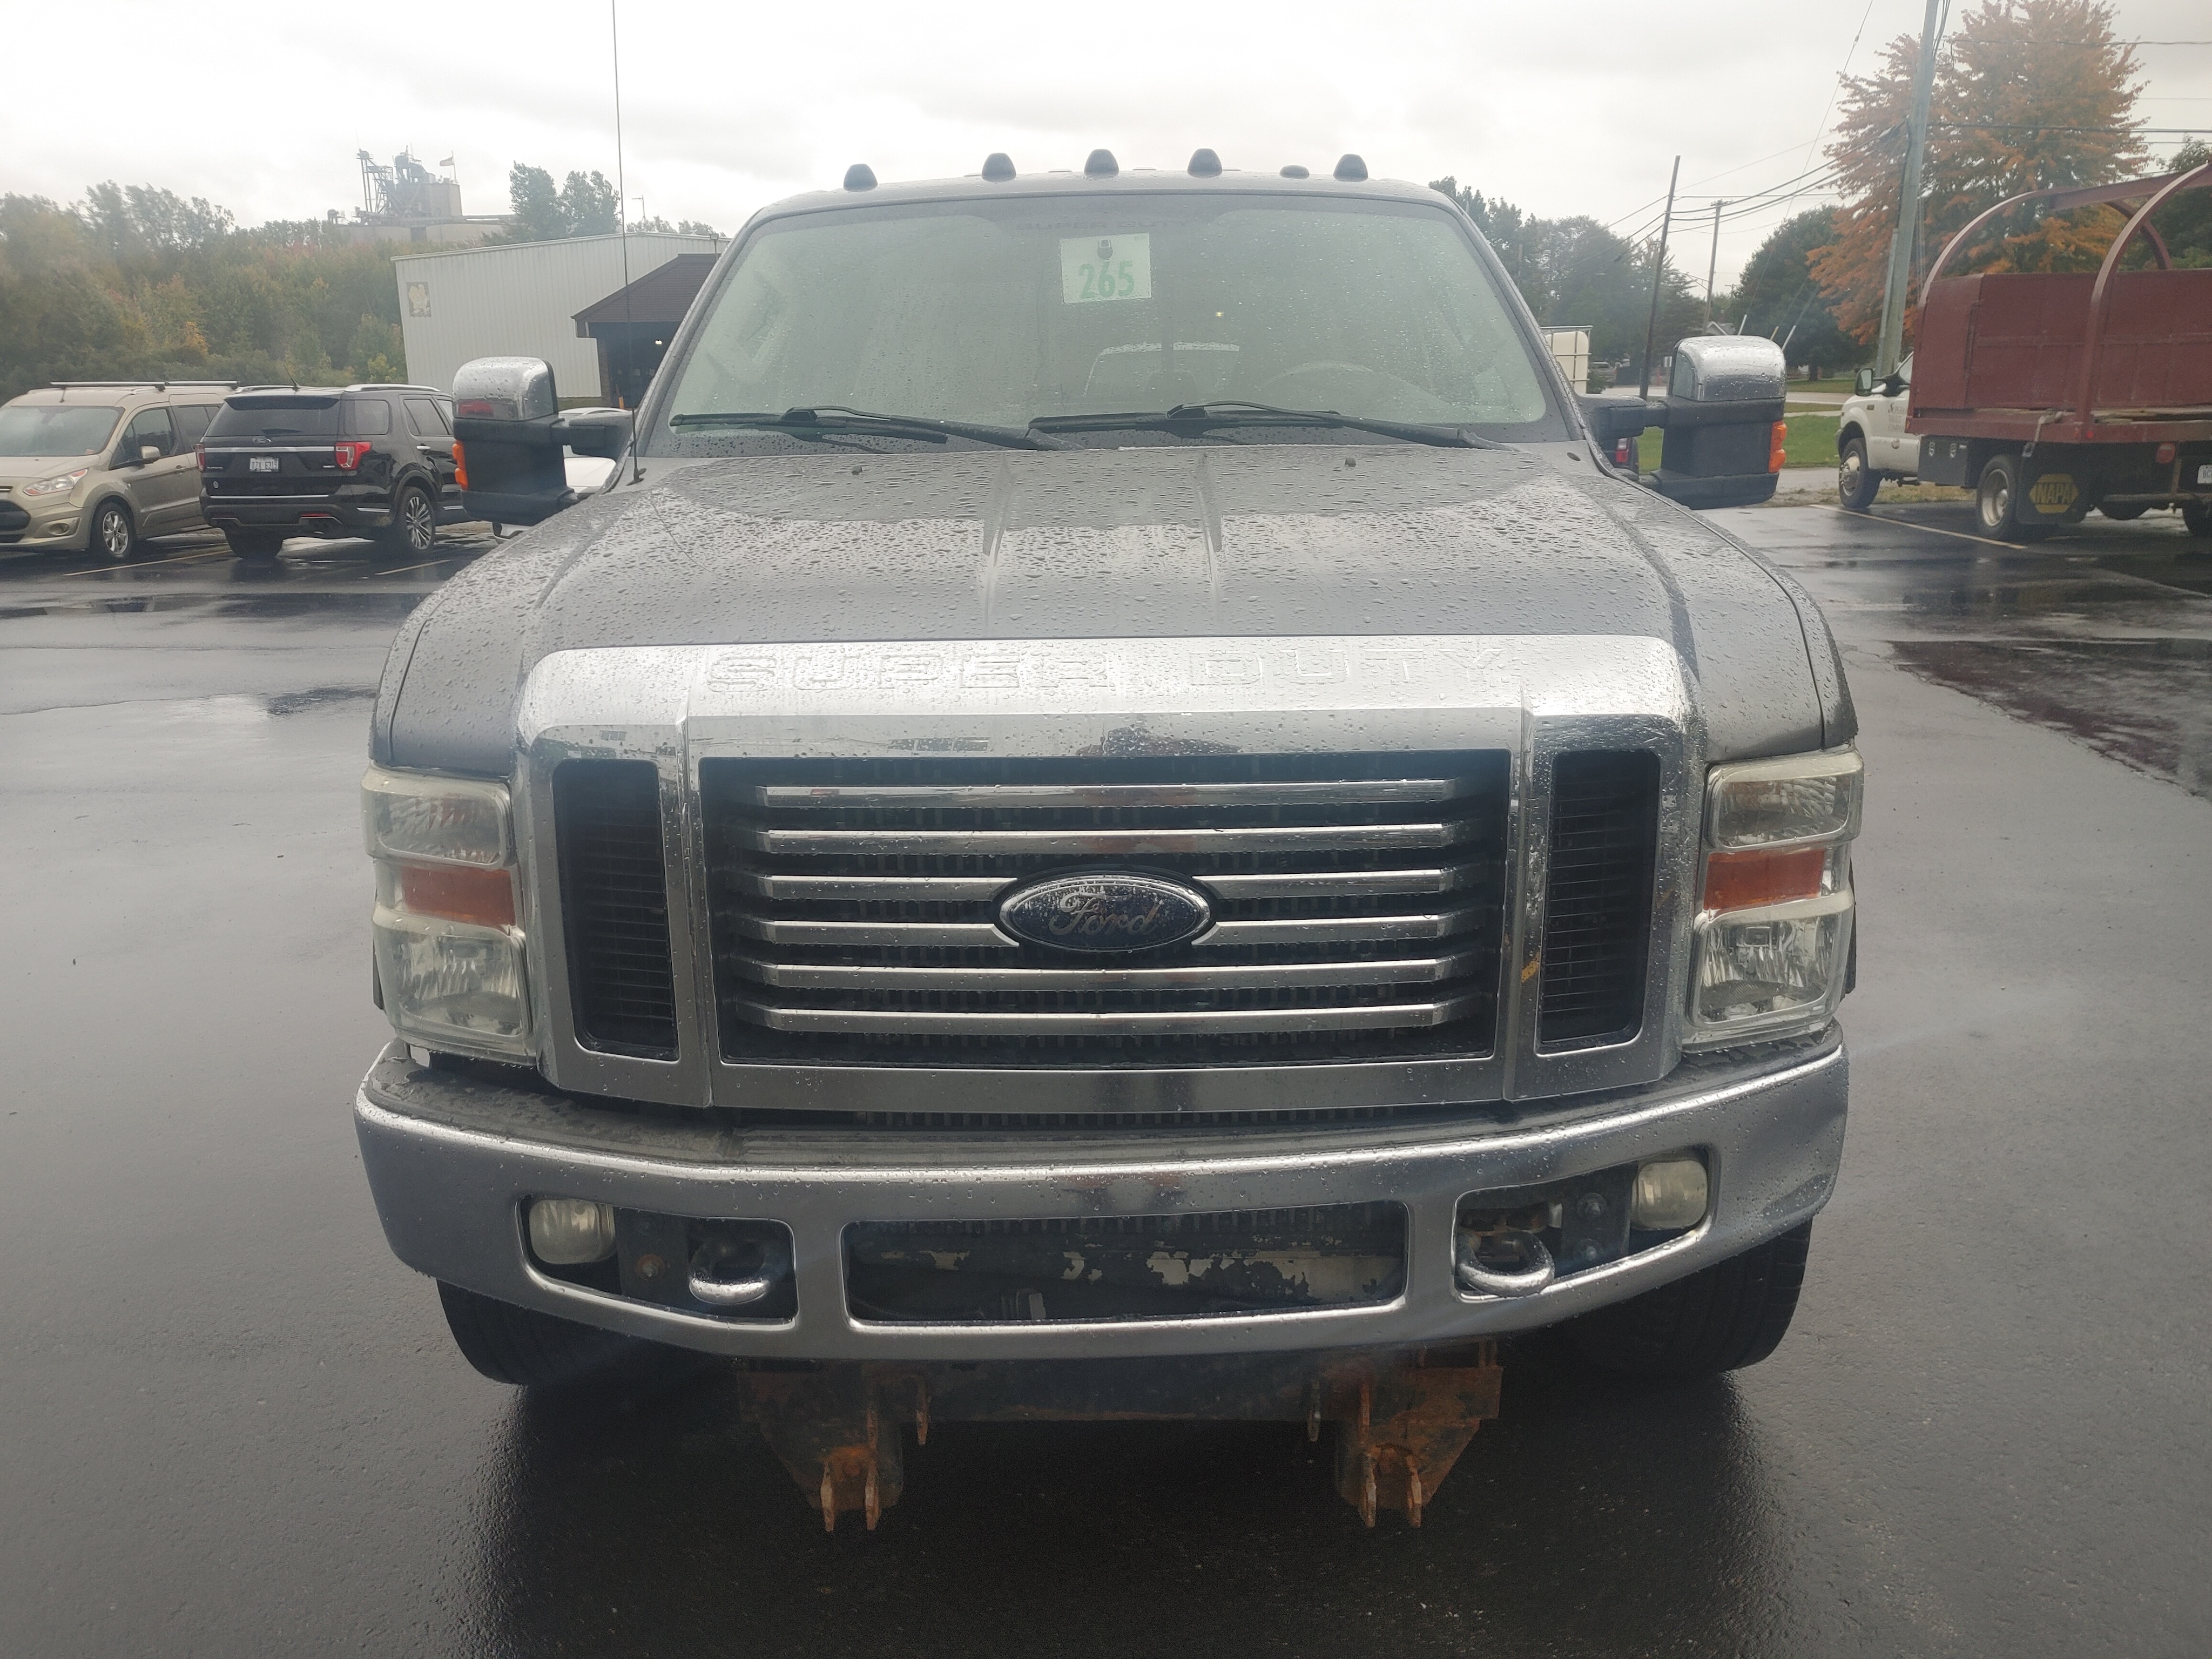 Used 2009 Ford F-250 Super Duty Lariat with VIN 1FTSW21R29EA35090 for sale in Hemlock, MI